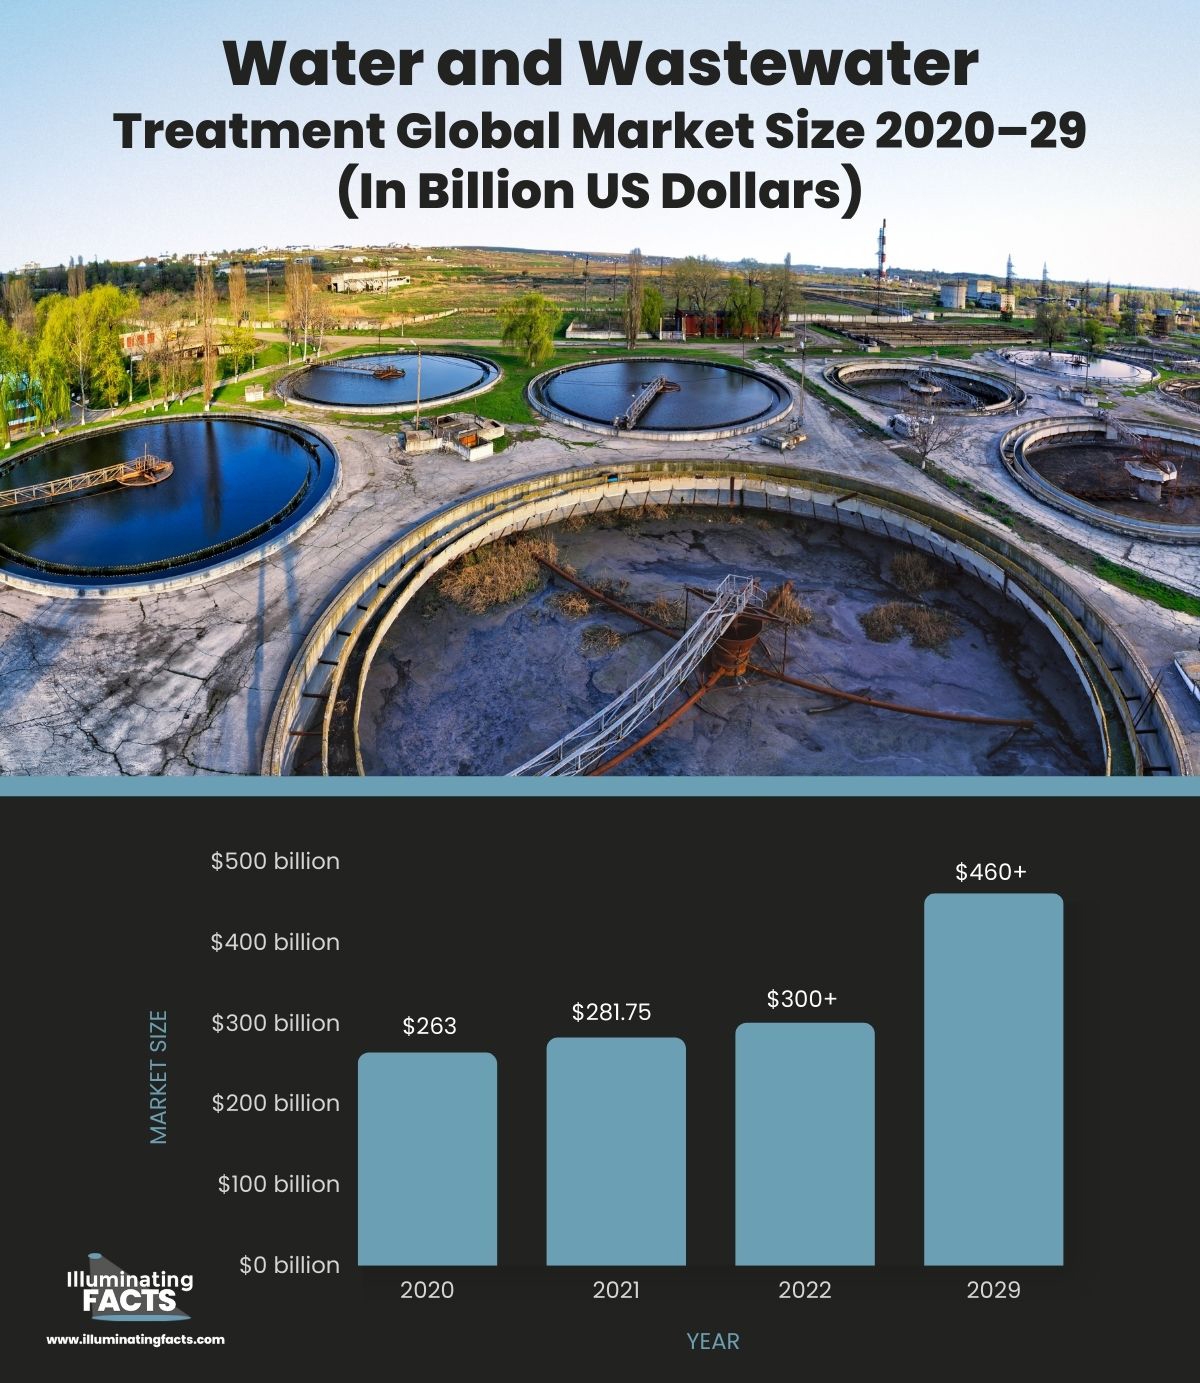 Water and Wastewater Treatment Global Market Size 2020 – 2029 (in Billion US Dollars)